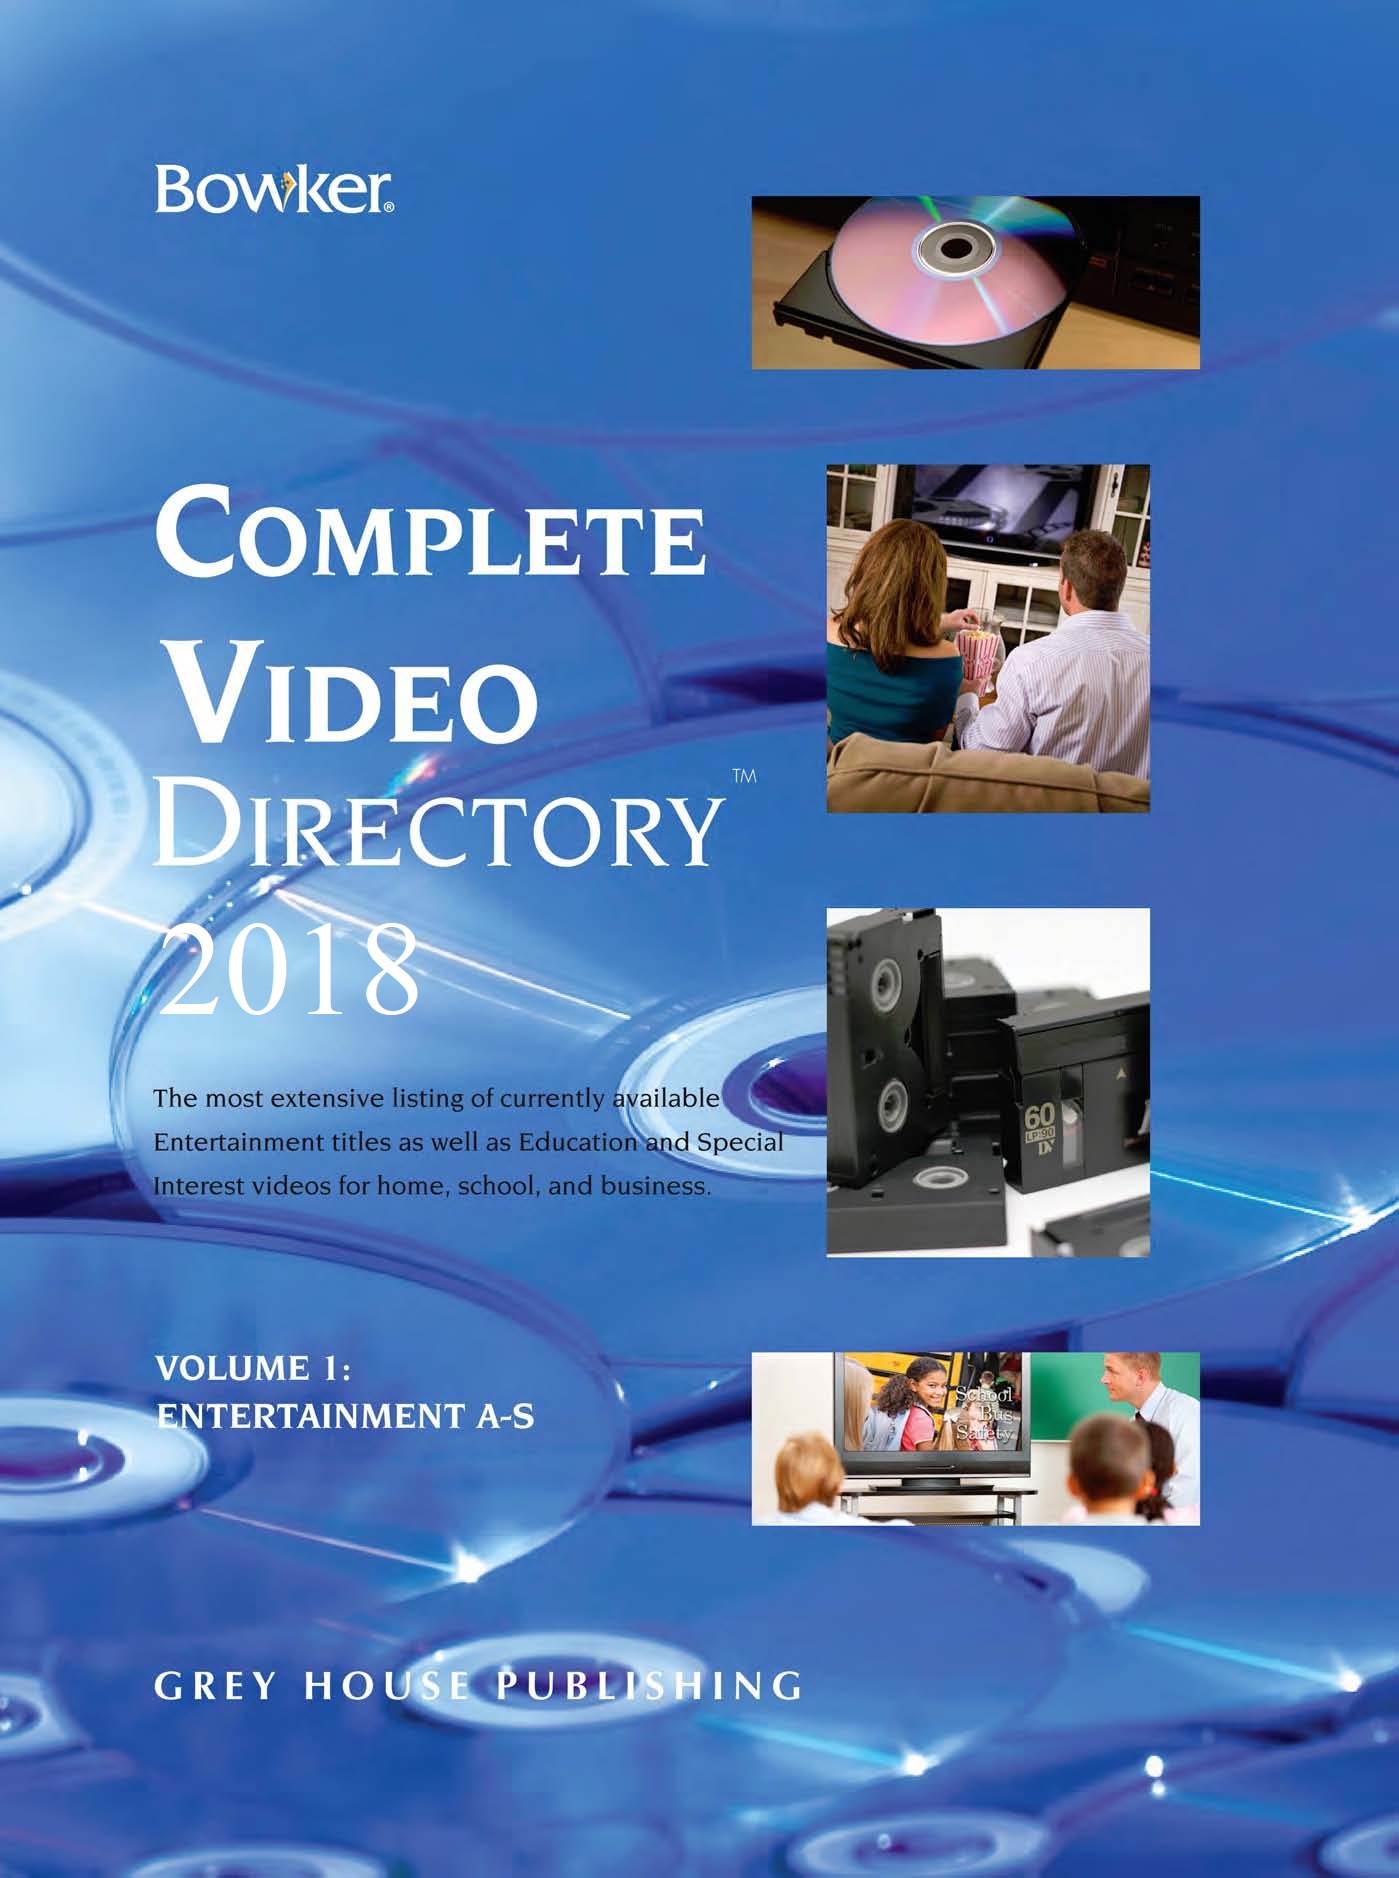 RR Bowker's Complete Video Directory